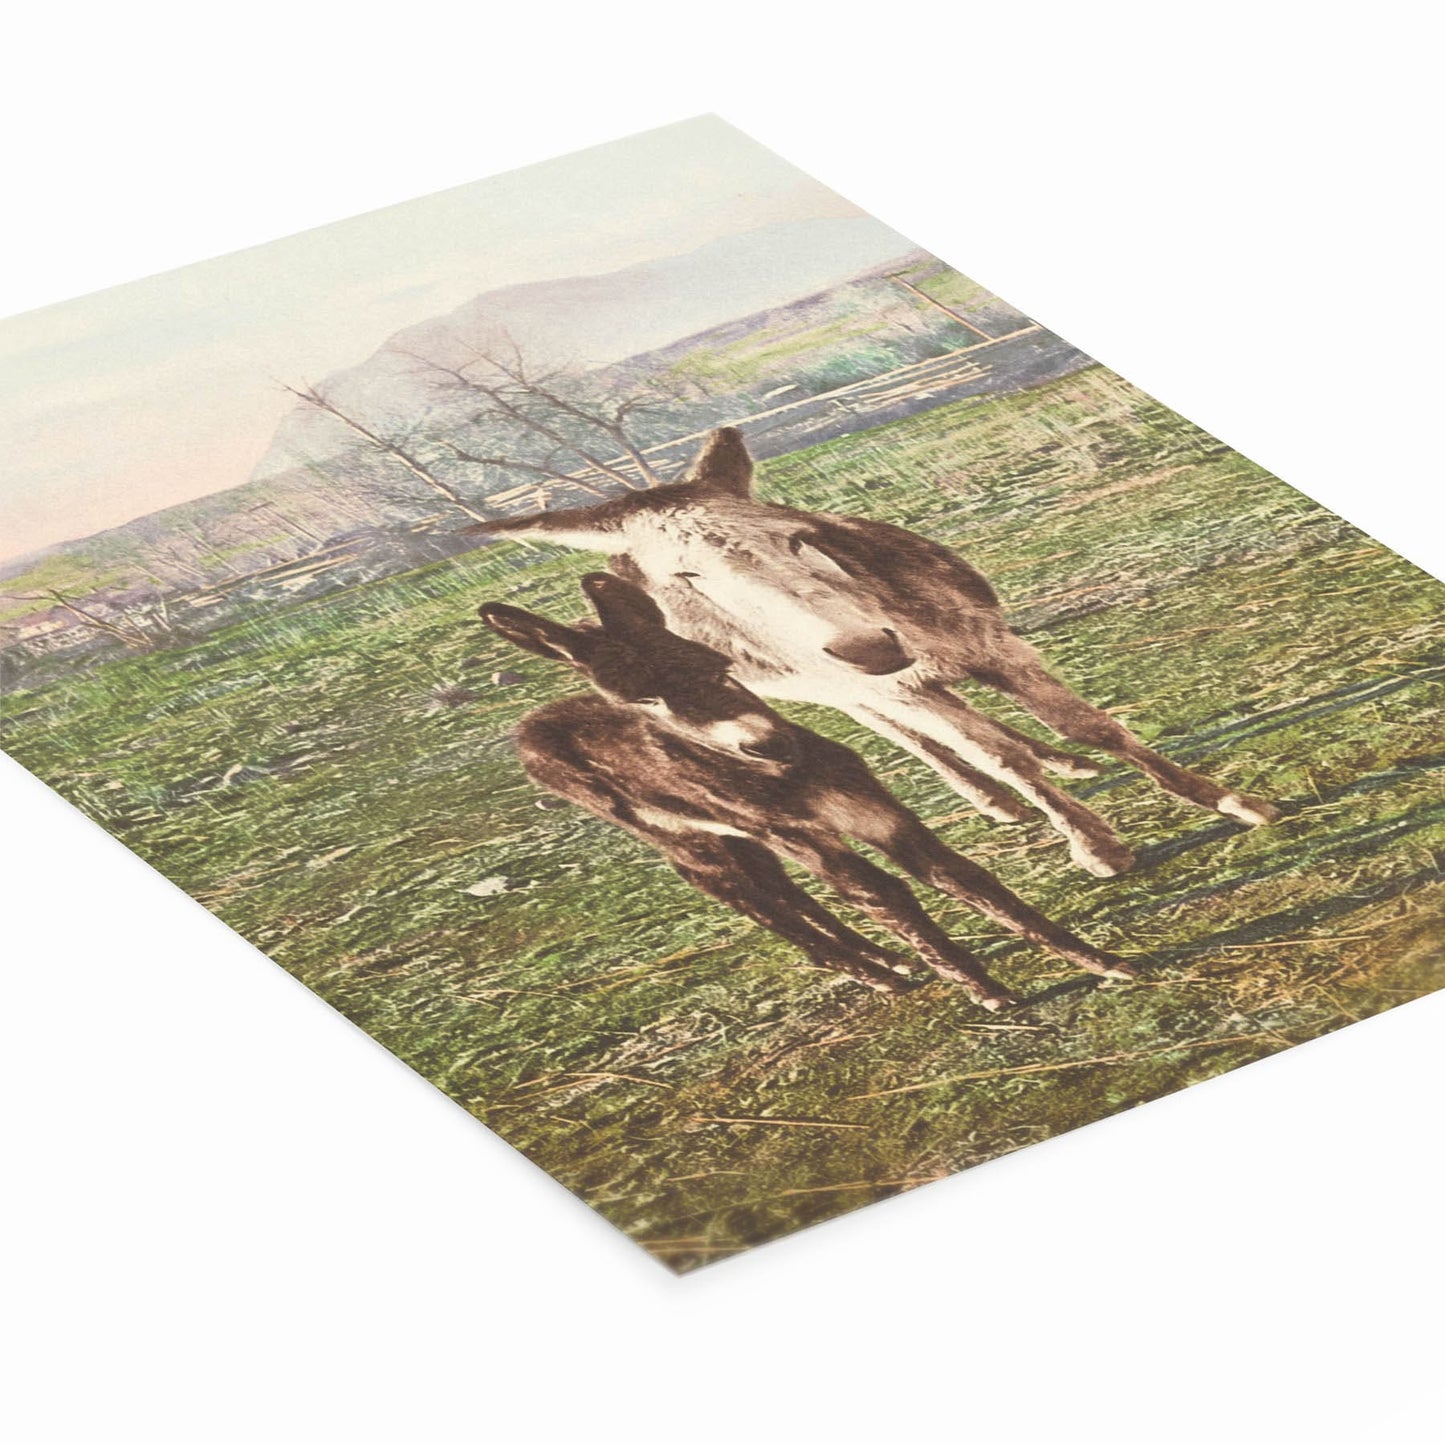 Two Donkey's in the Mountains Picture Laying Flat on a White Background